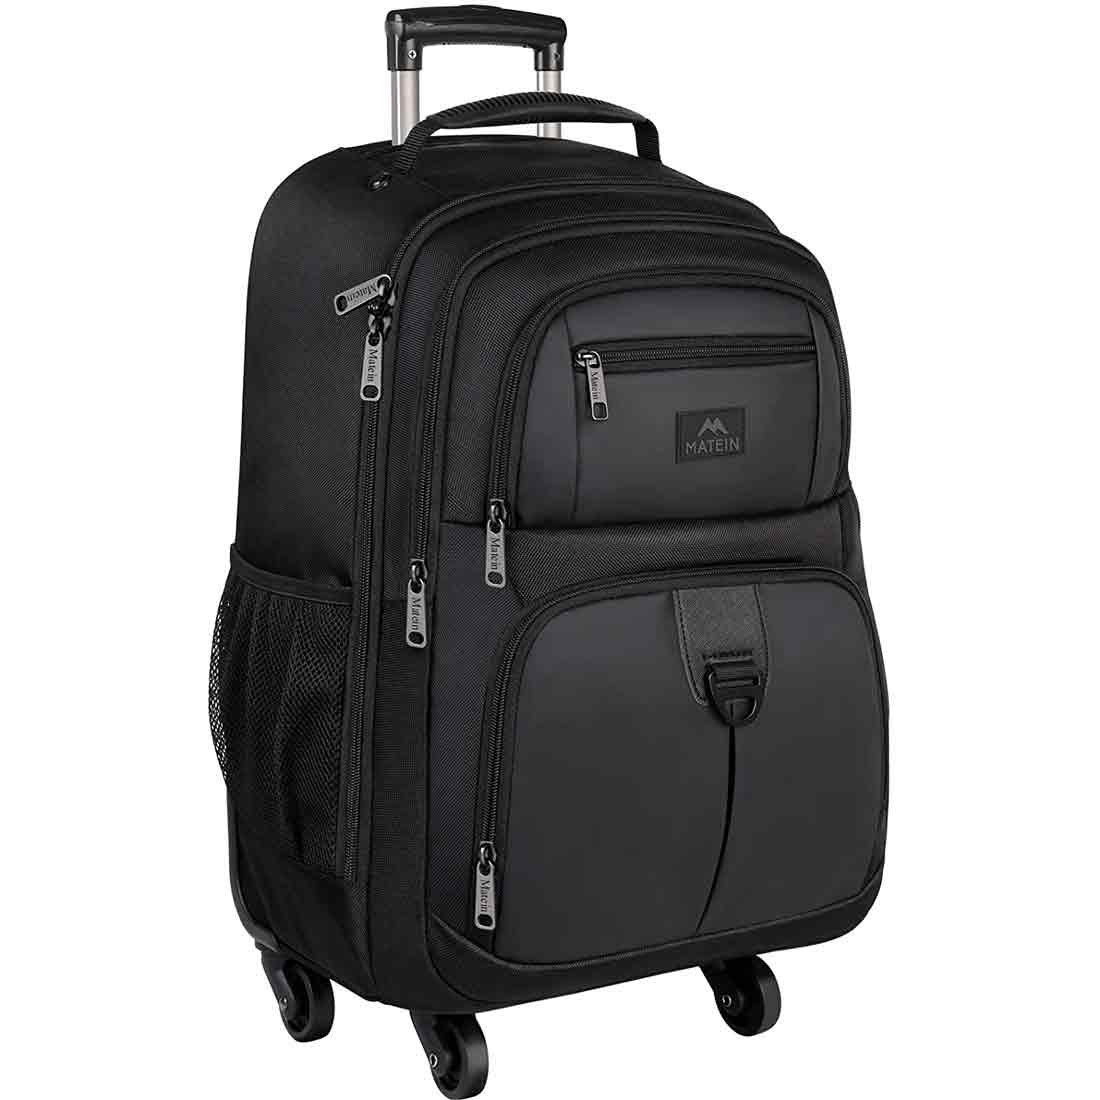 4 Wheels Rolling Backpack for Travel